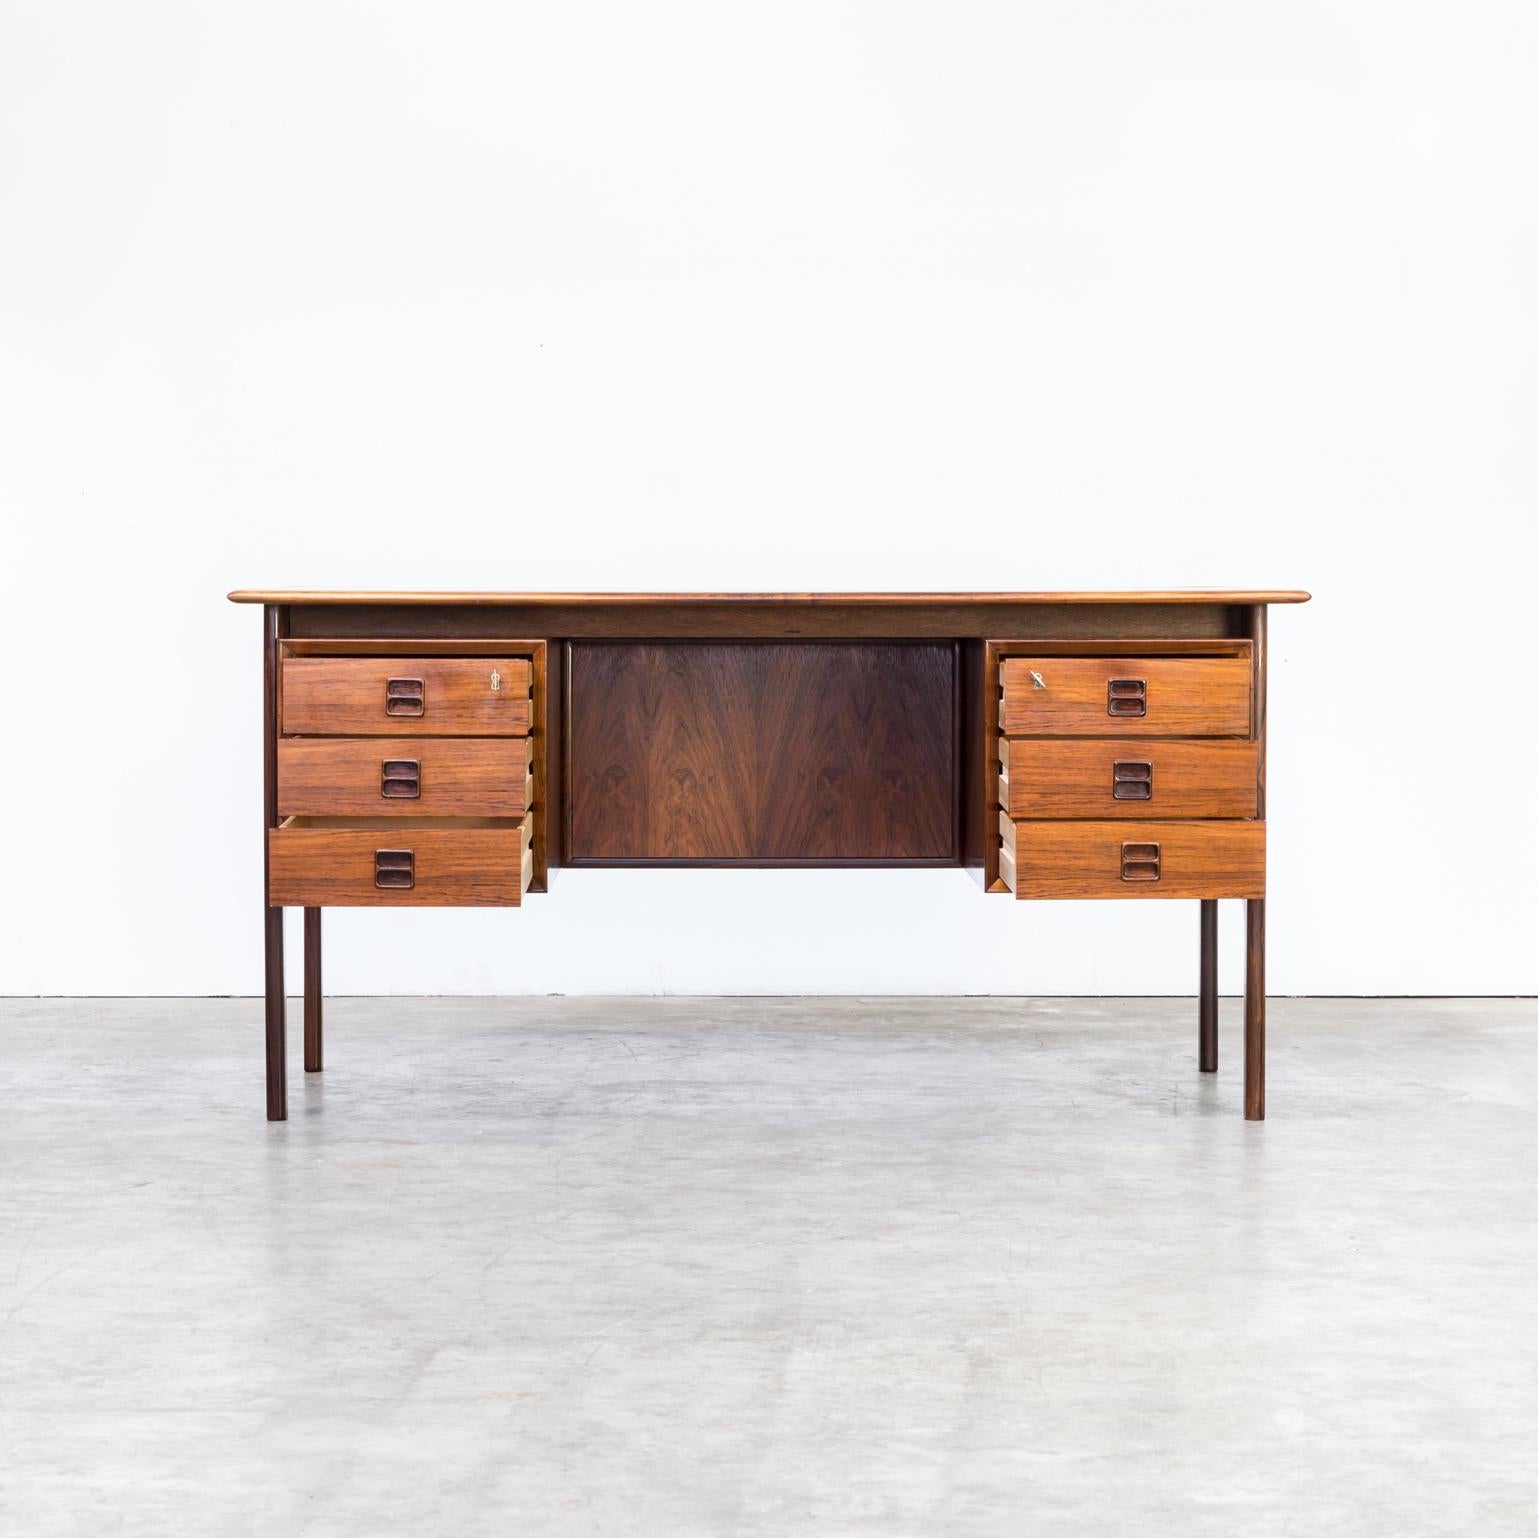 1960s Arne Vodder rosewood writing desk for Sibast. Good condition consistent with age and use.